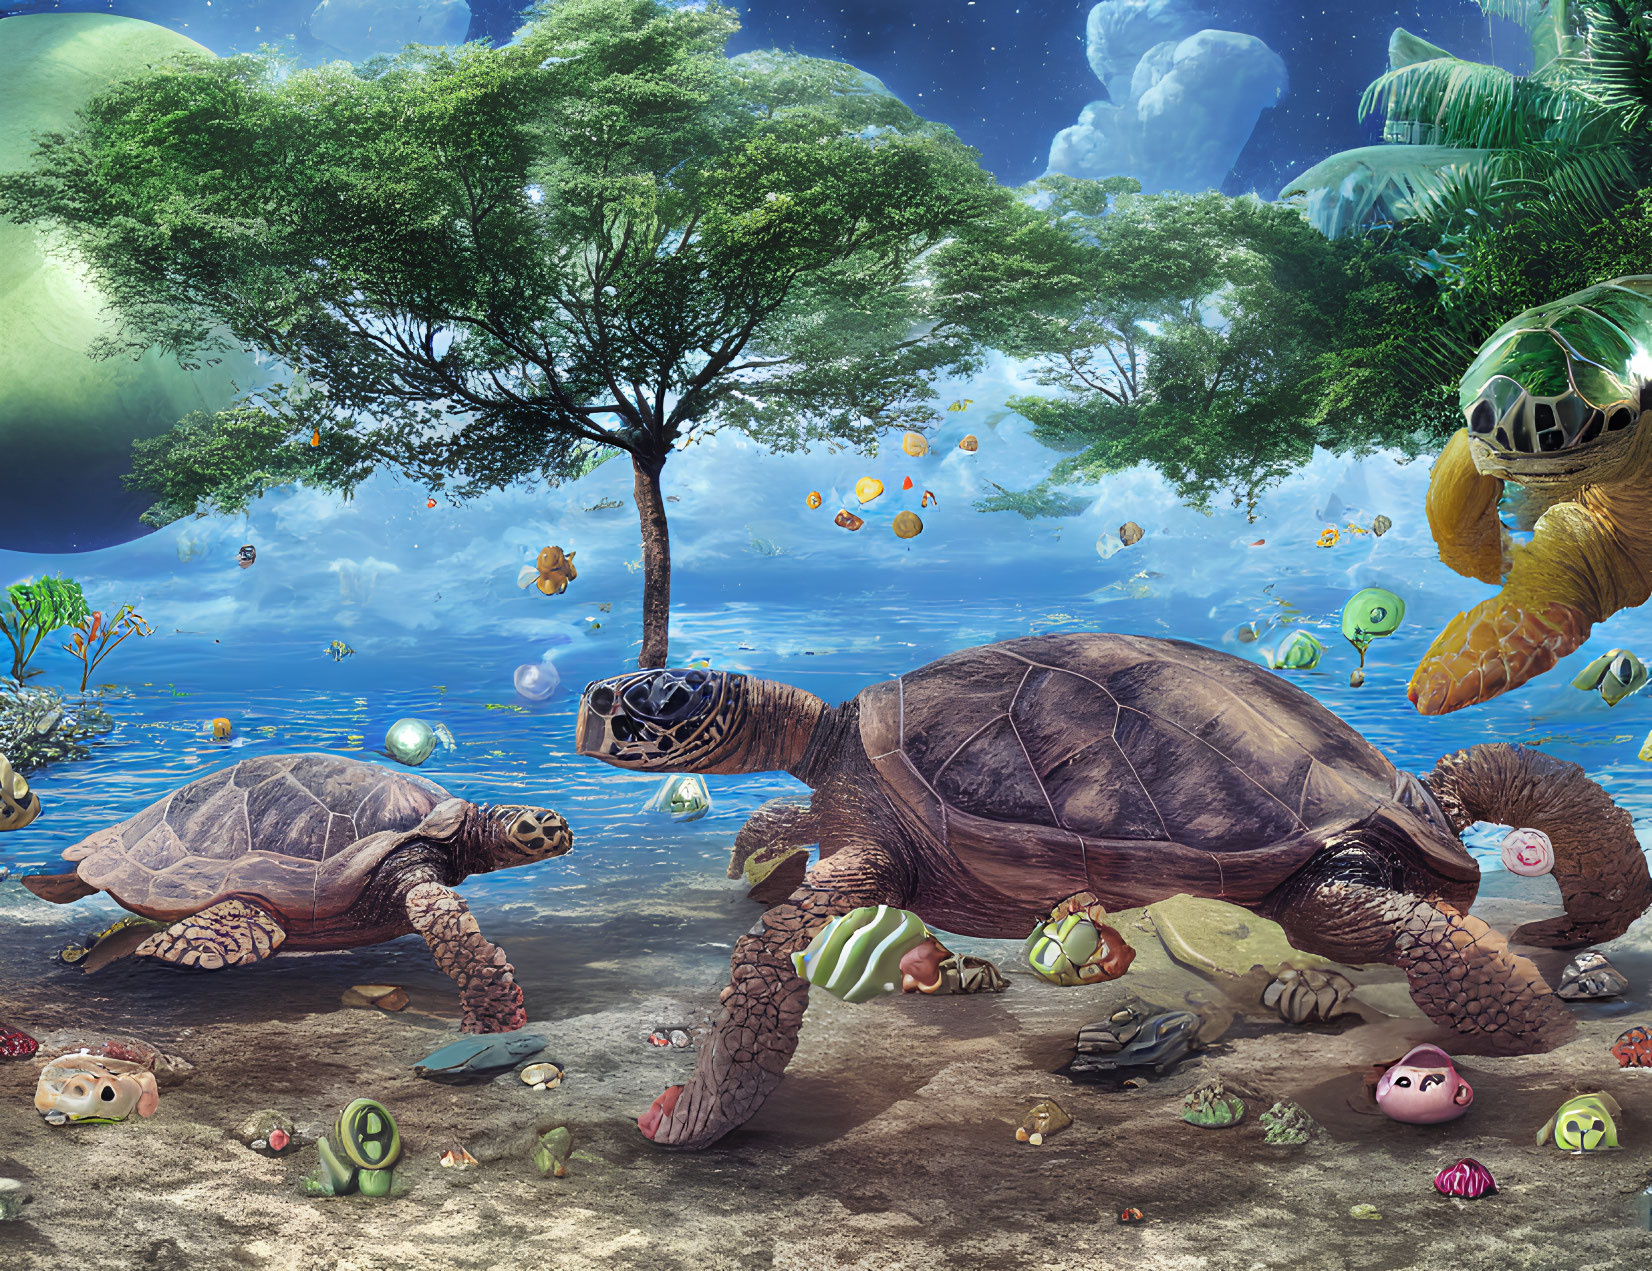 Colorful underwater scene with turtles, fish, tree, moon, and whimsical elements